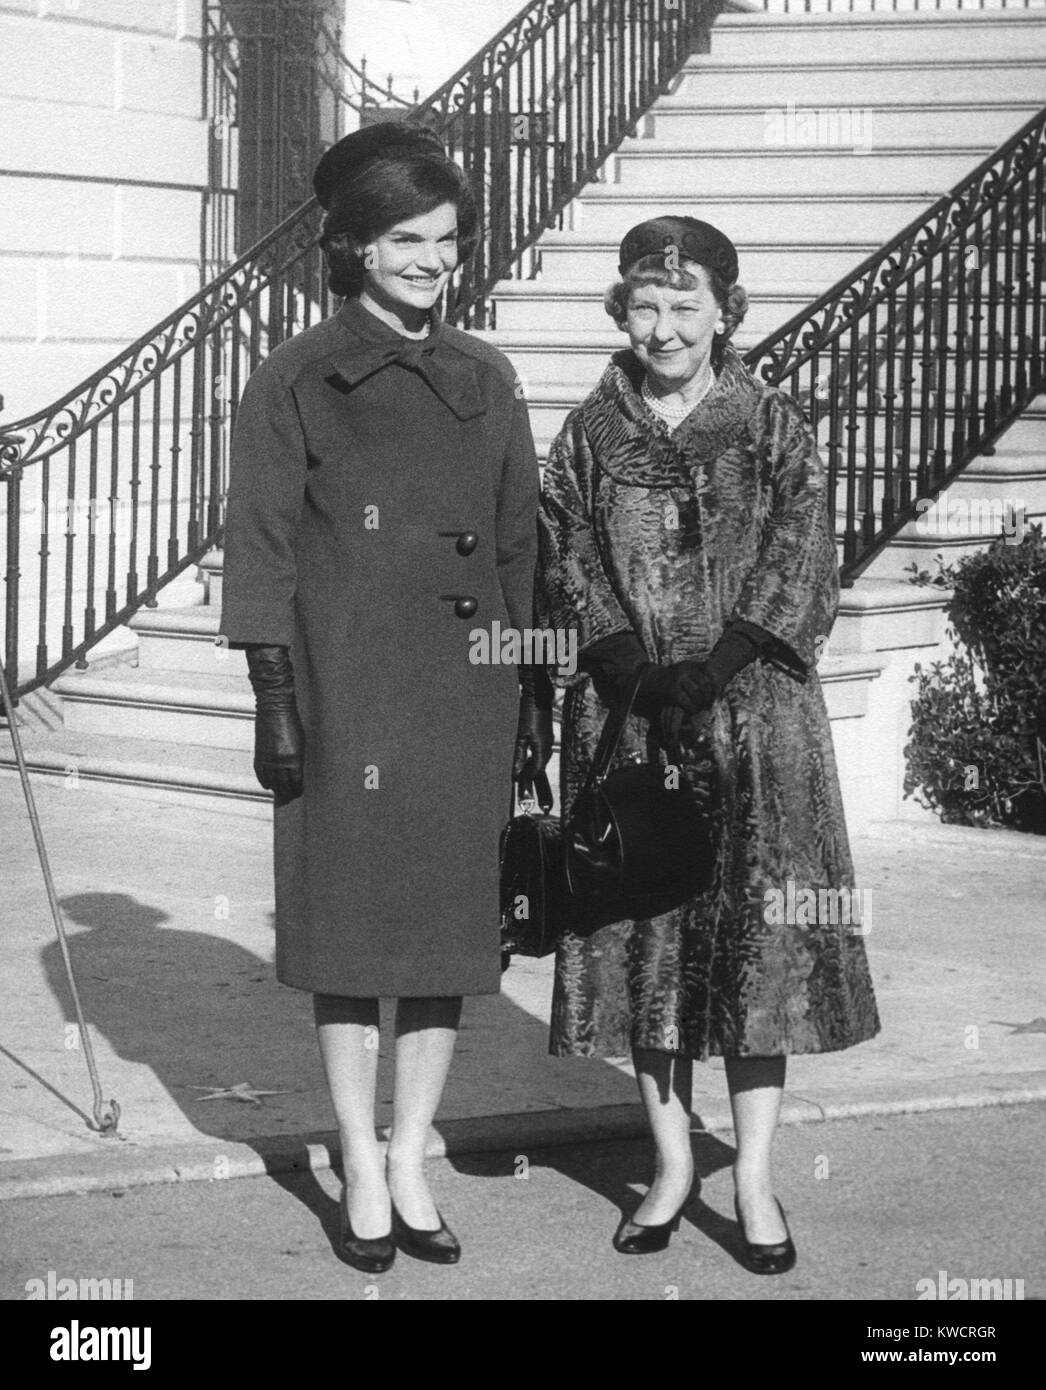 Mamie Eisenhower and Jacqueline Kennedy after the future First Lady's tour of the White House. Mrs. Kennedy first impressions led to her signature project, an ambitious historical restoration of the White House interiors. - (BSLOC 2015 1 155) Stock Photo